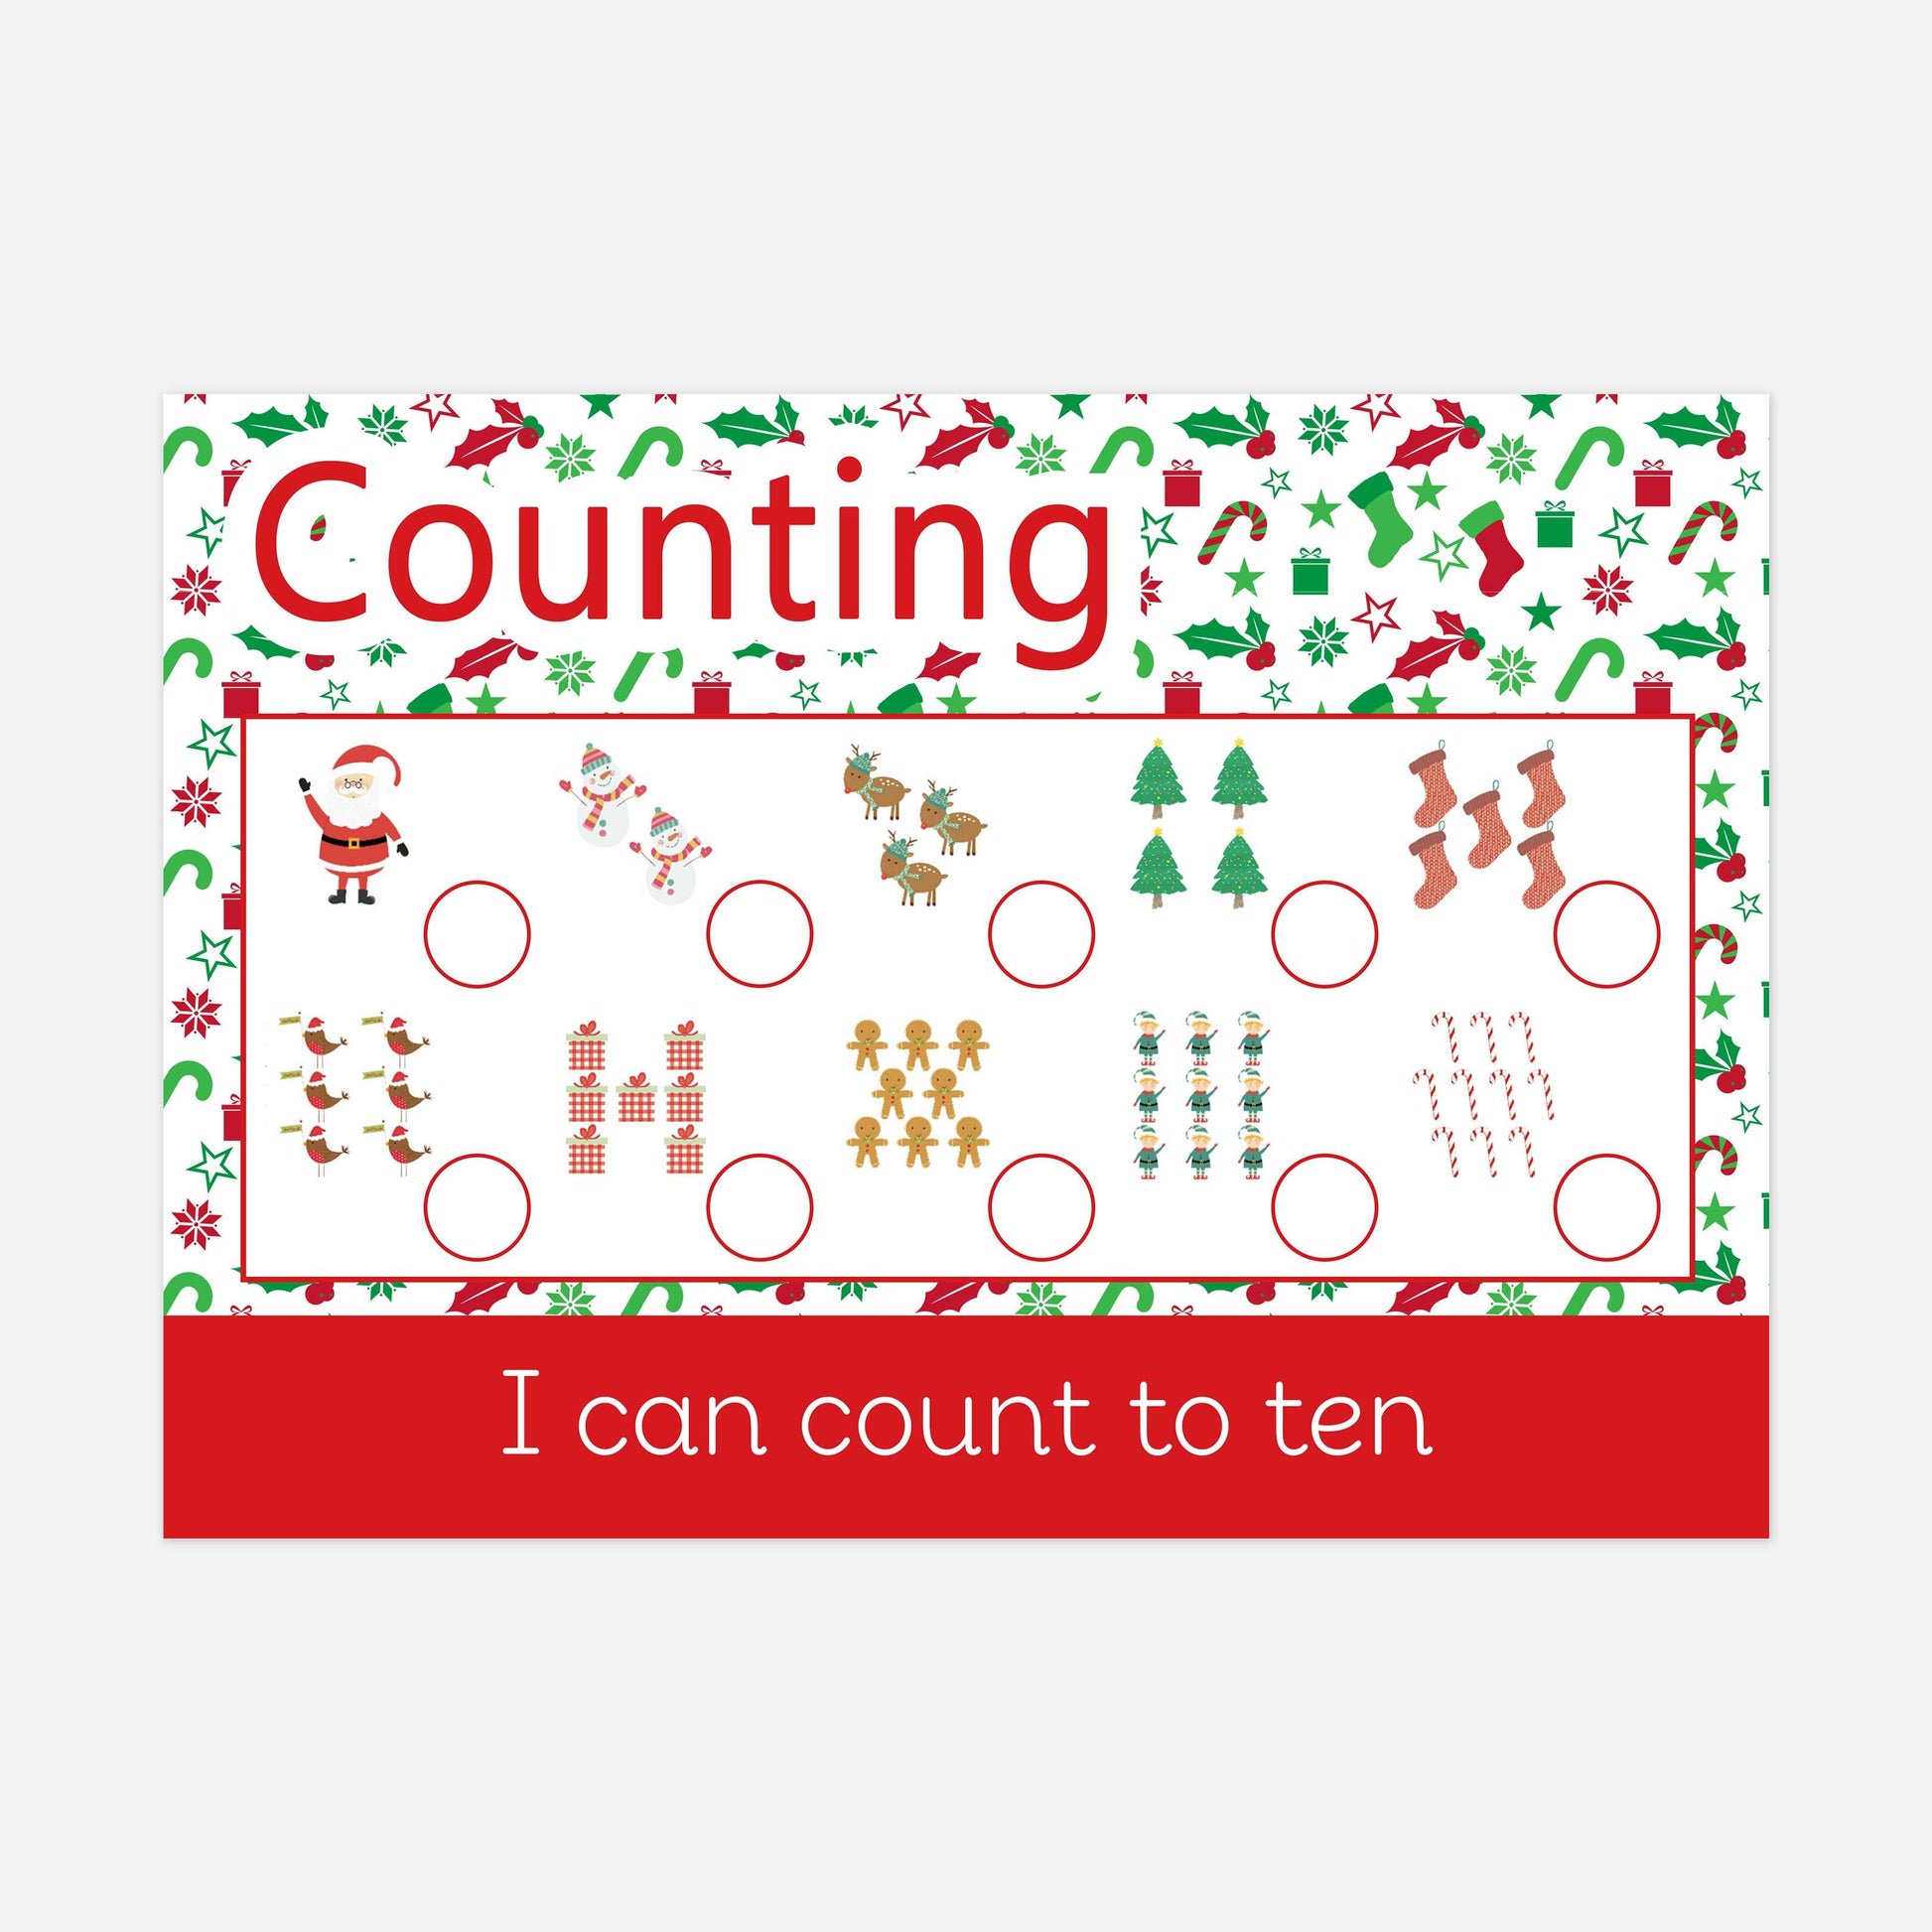 READY-TO-POST Wipe Clean Christmas Counting Learning Mat - Christmas Edition-Little Boo Learning-christmas